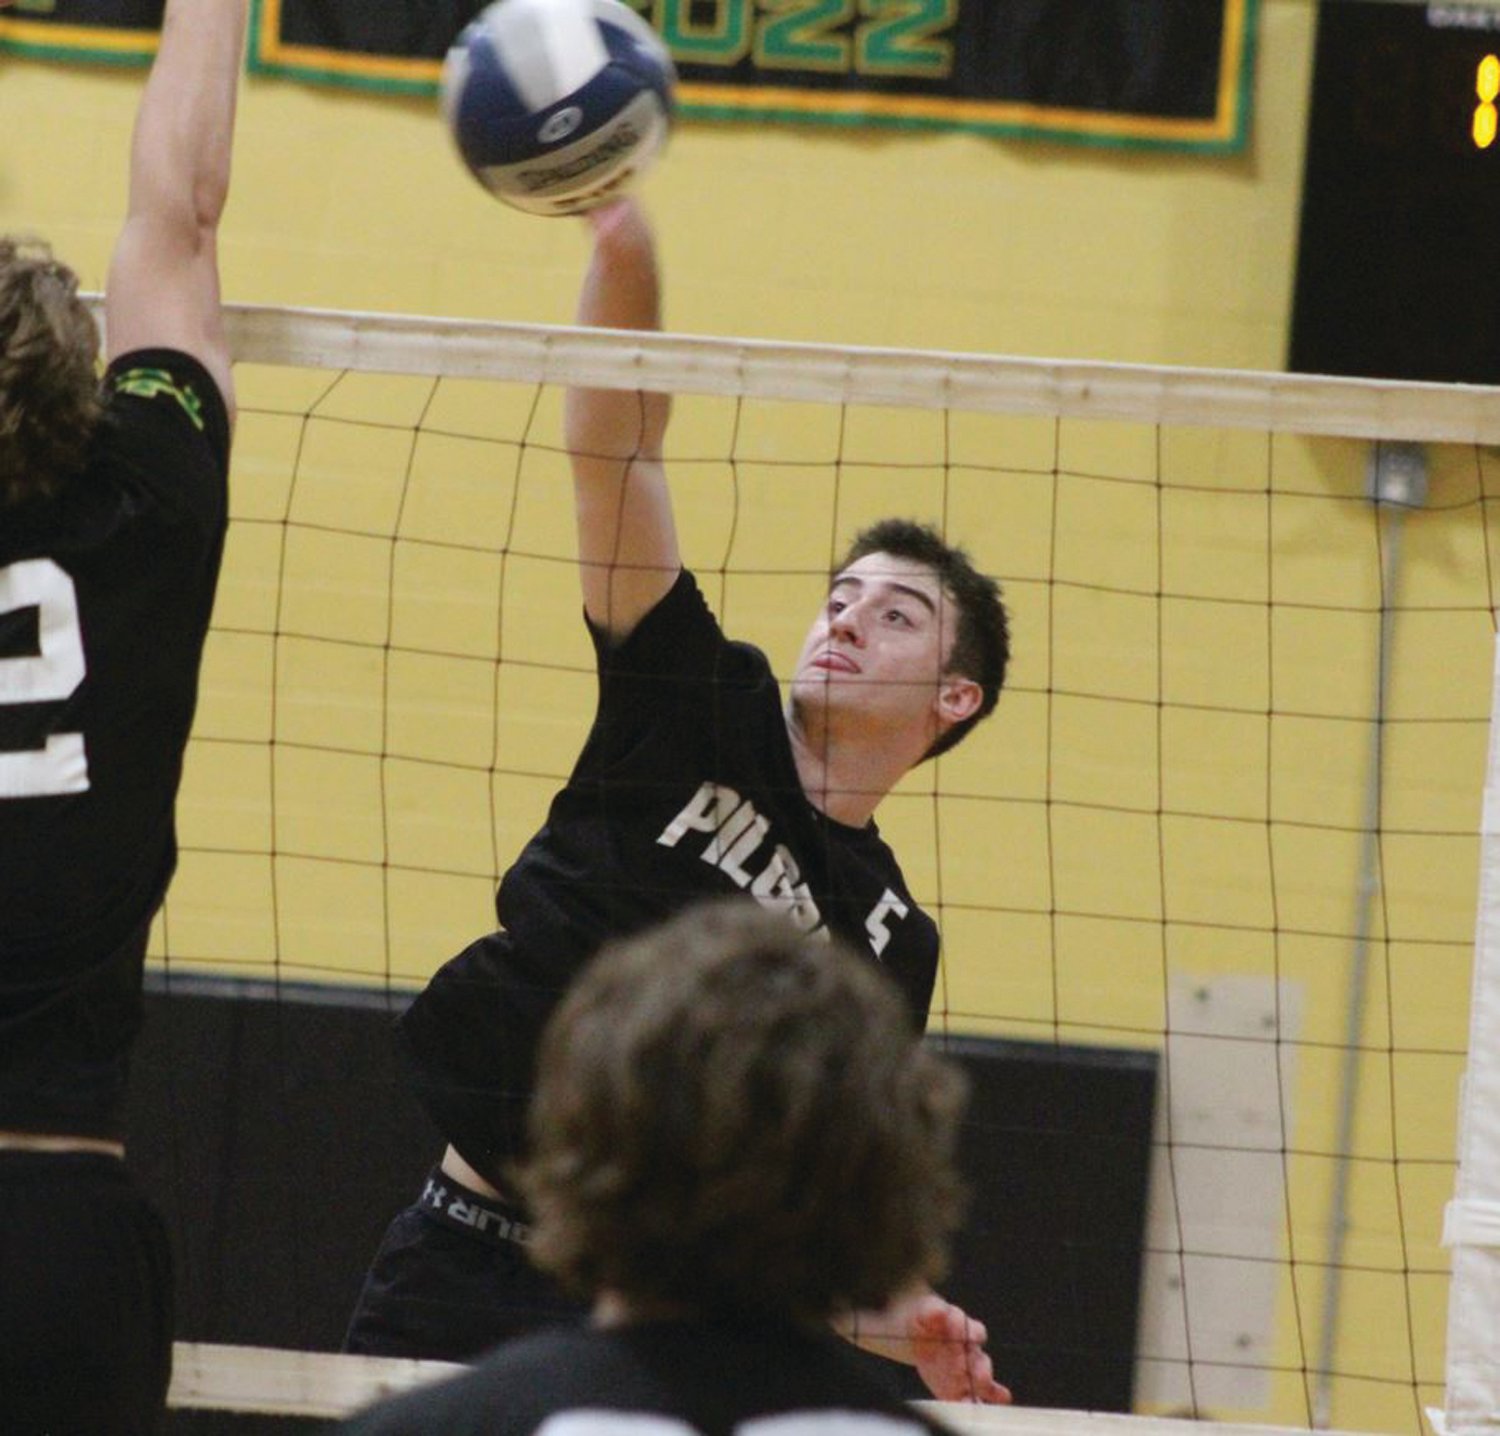 UP AND OVER: Benjamin Conti sends the ball over the net. (Warwick Beacon Photo)